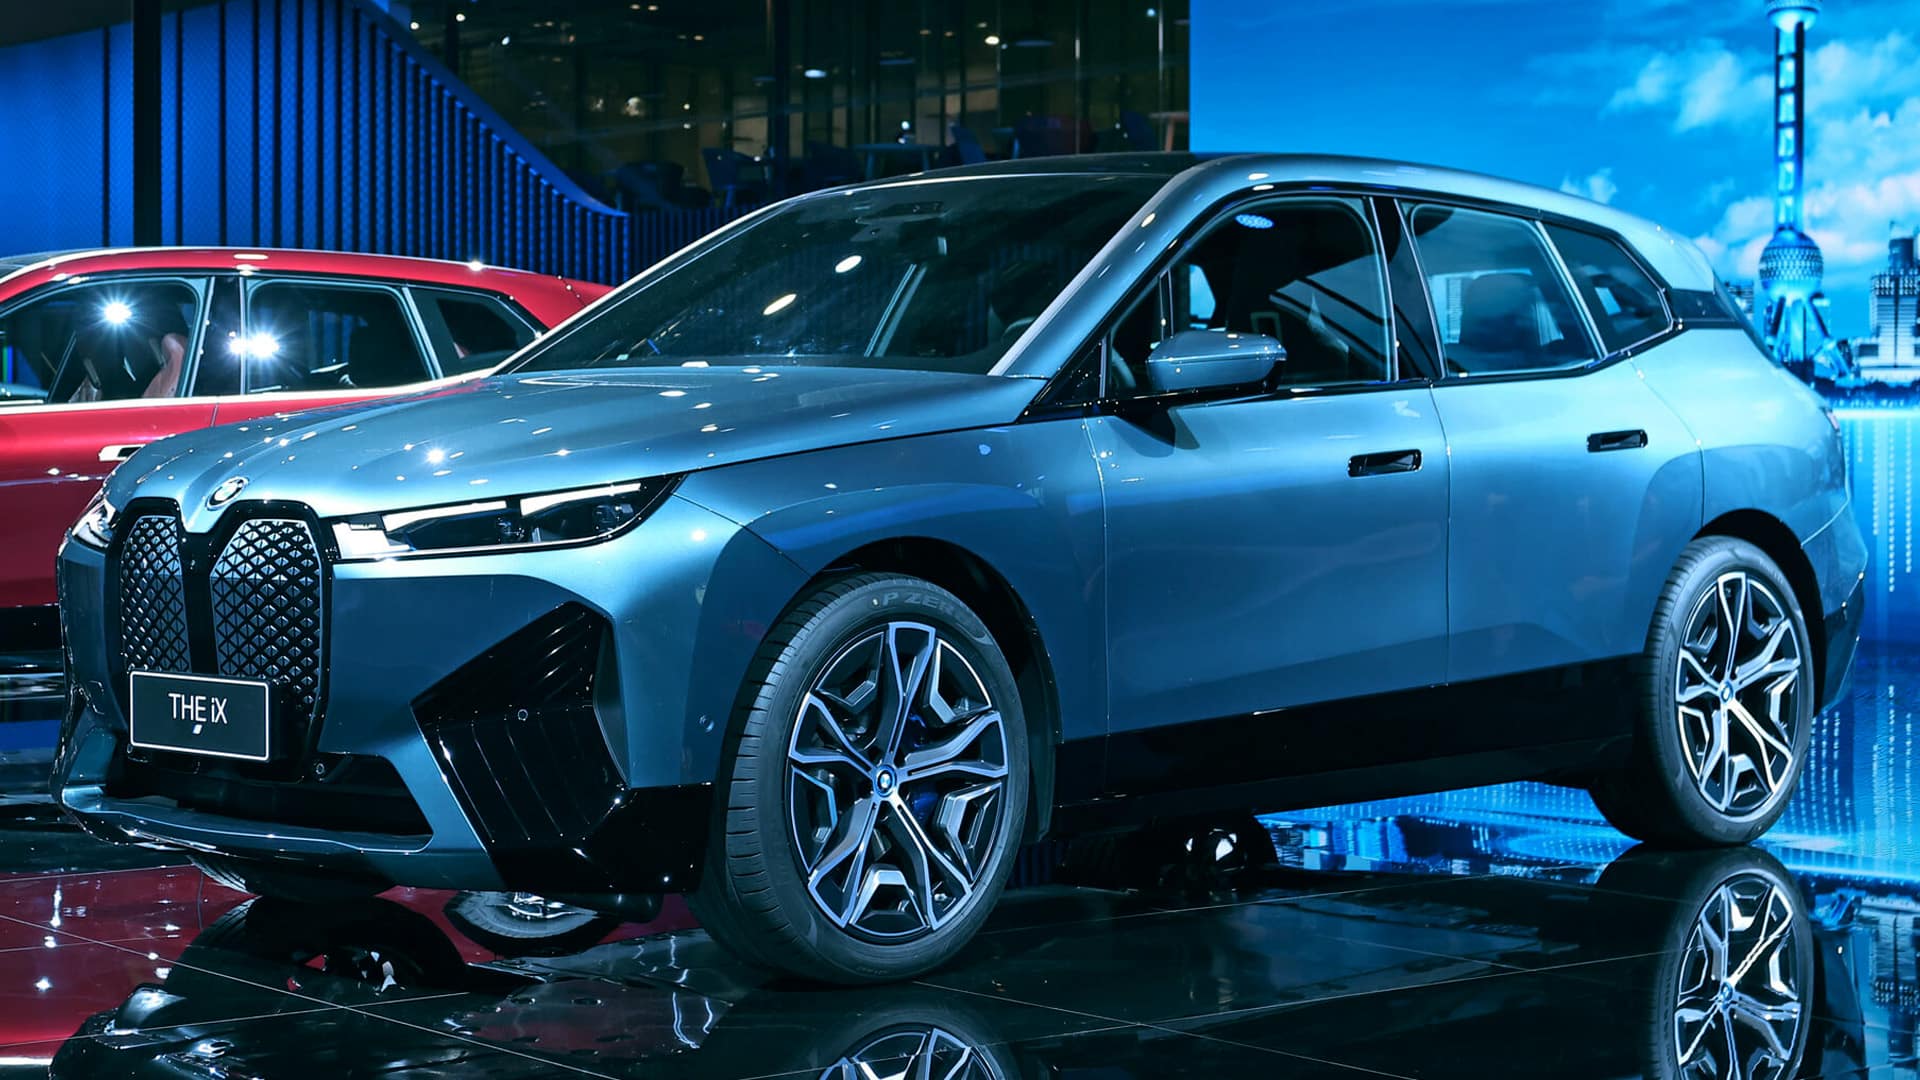 BMW launches iX electric SUV in India, priced at Rs 1.16 cr